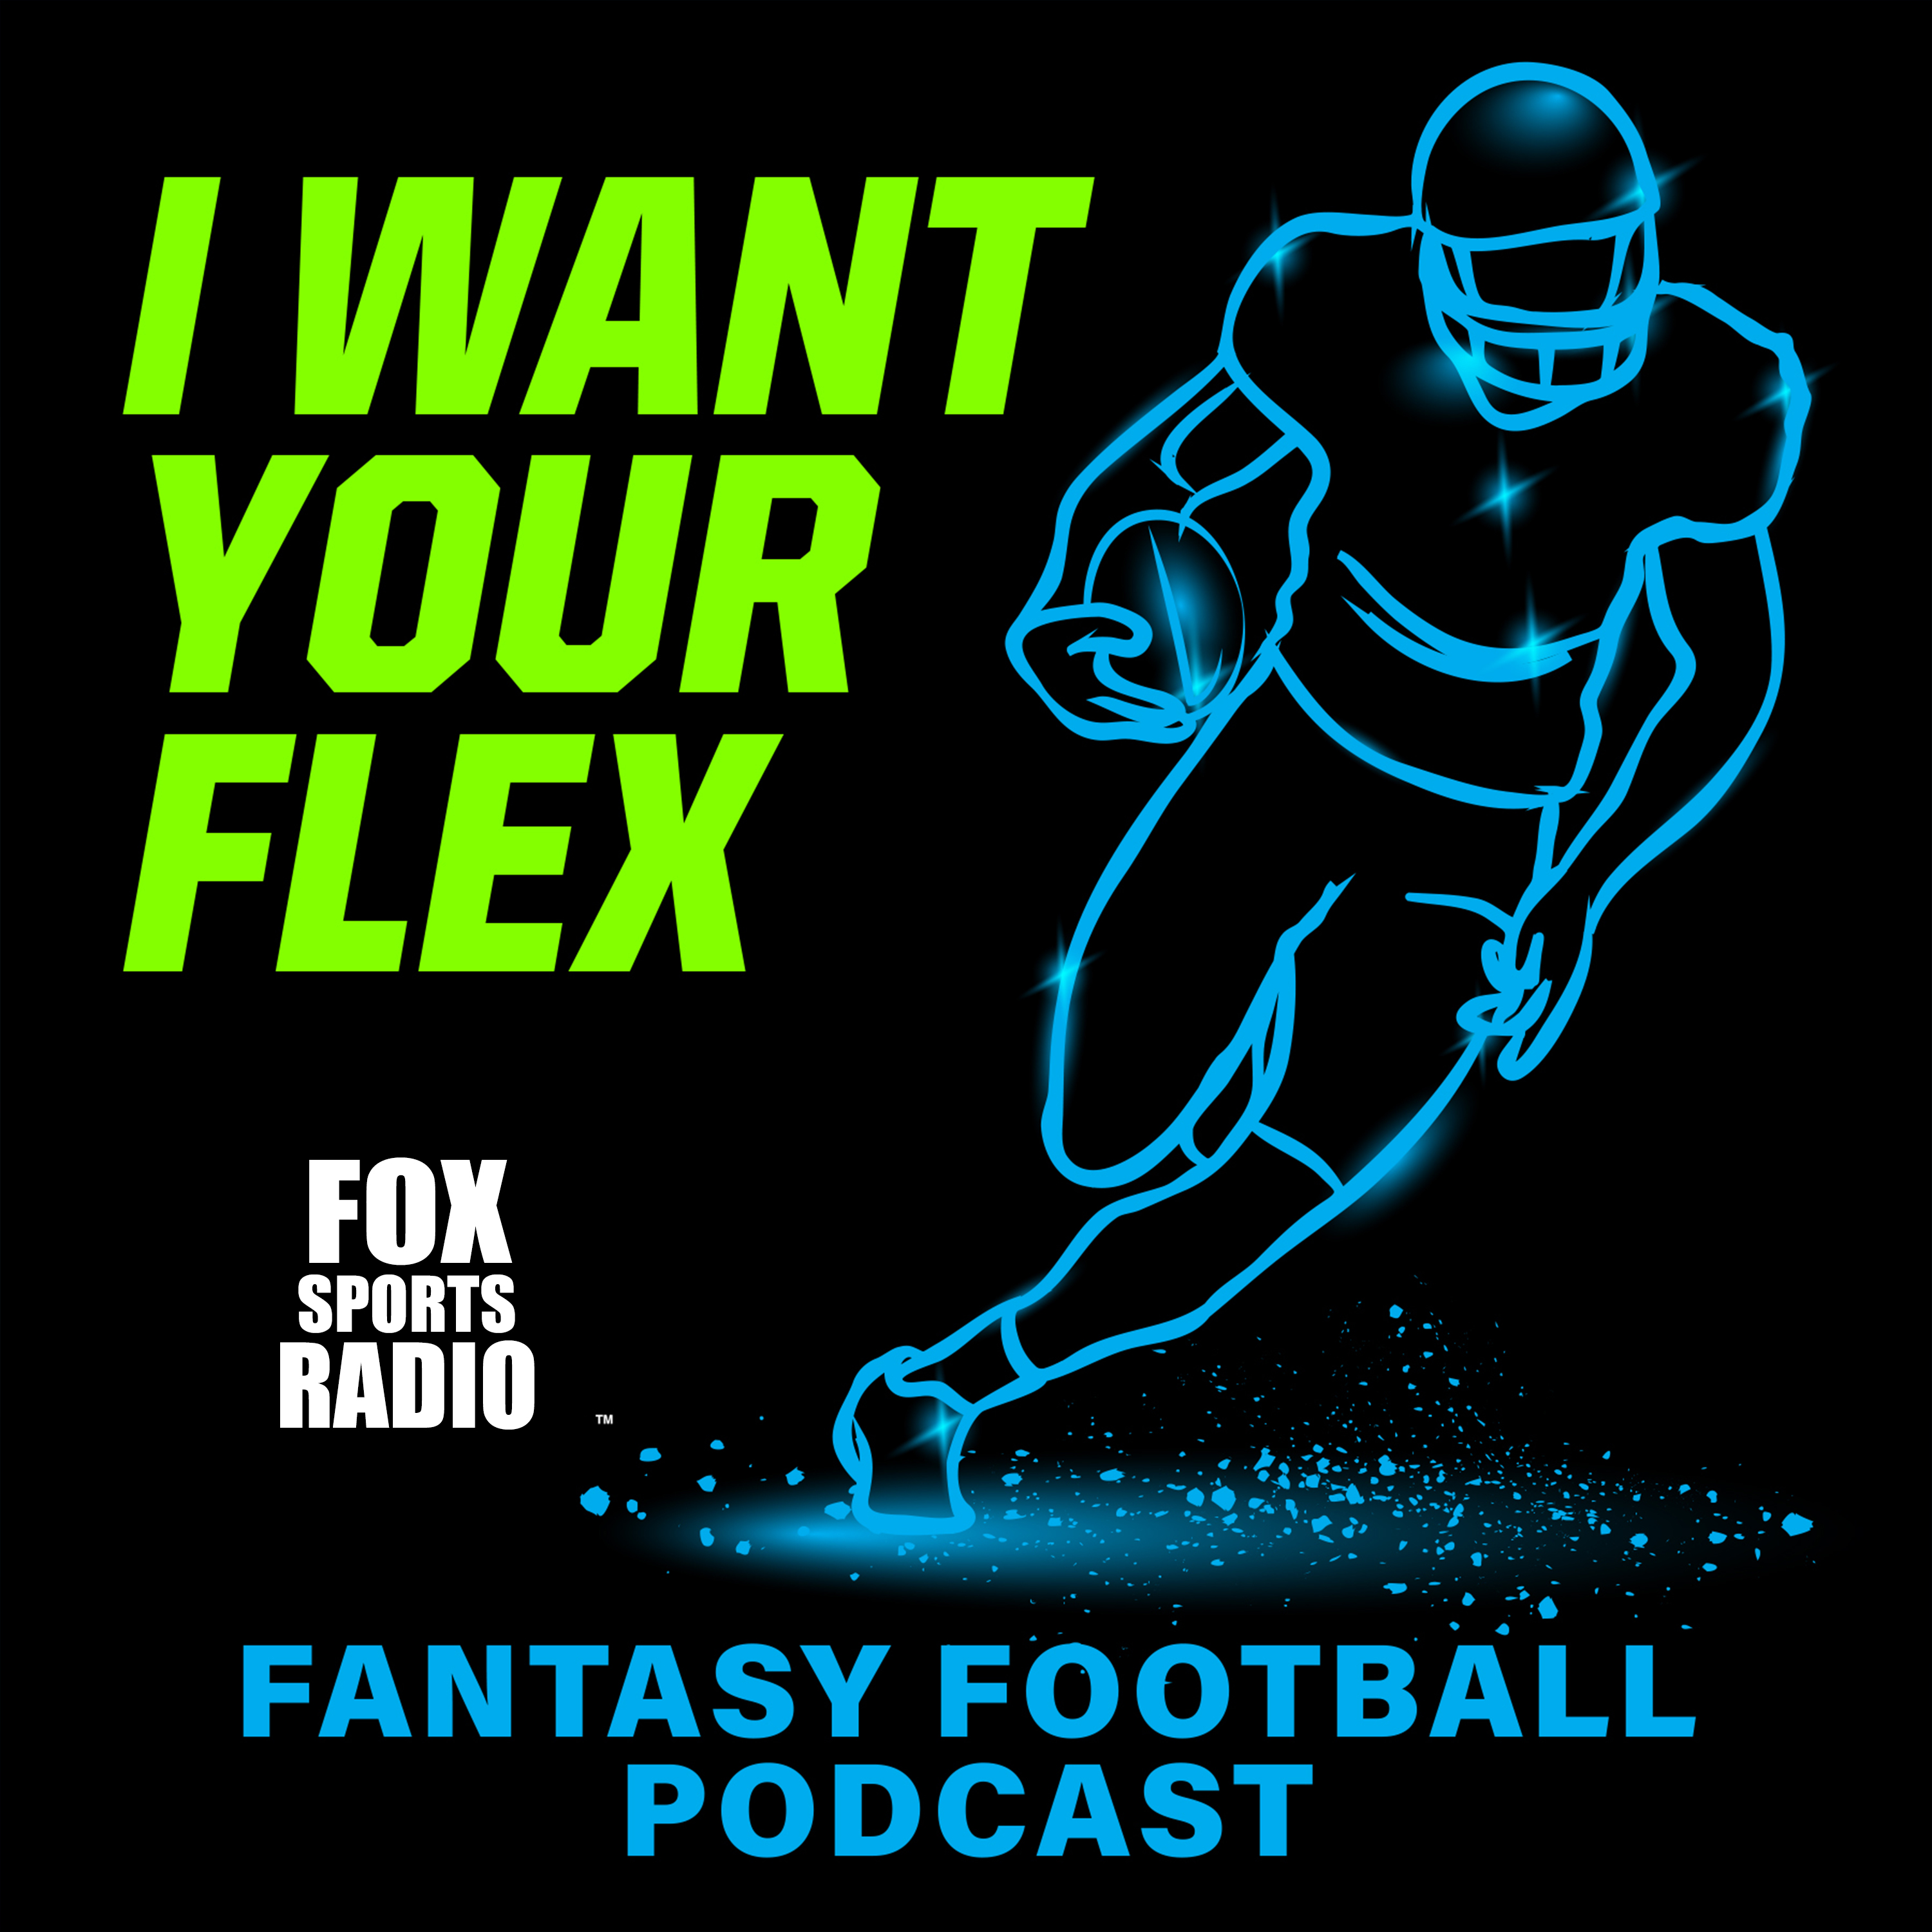 I WANT YOUR FLEX - Week 16 Rankings and Hot Plays